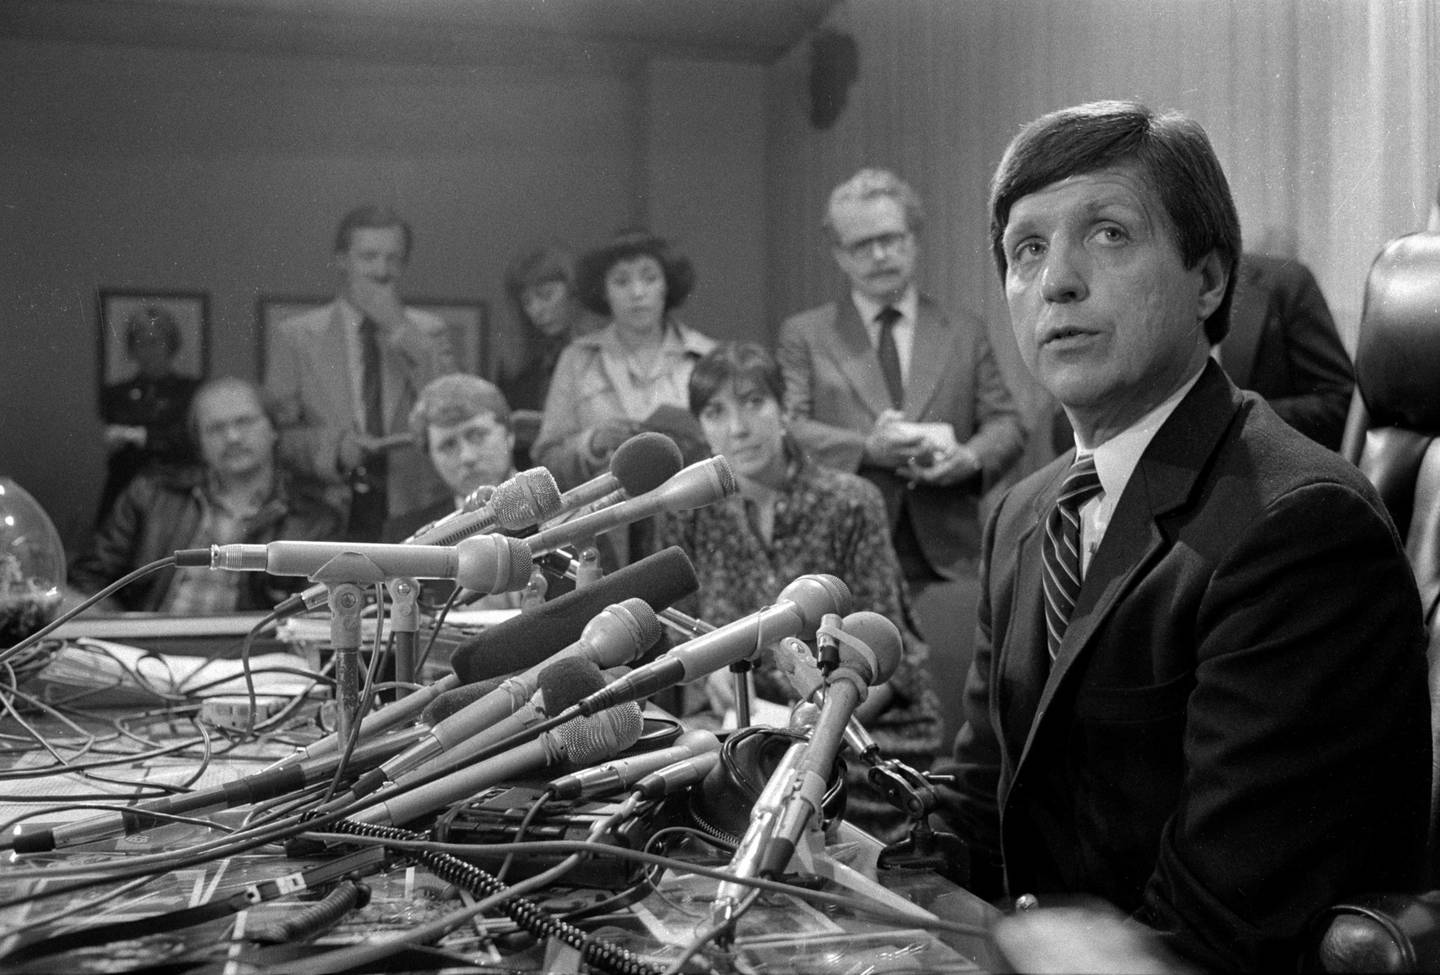 Chicago police Superintendent Richard Brzeczek at a news conference at 11th and State streets in Chicago on Oct. 19, 1982. Brzeczek publicly downplayed the possibility of James Lewis being the Tylenol killer.